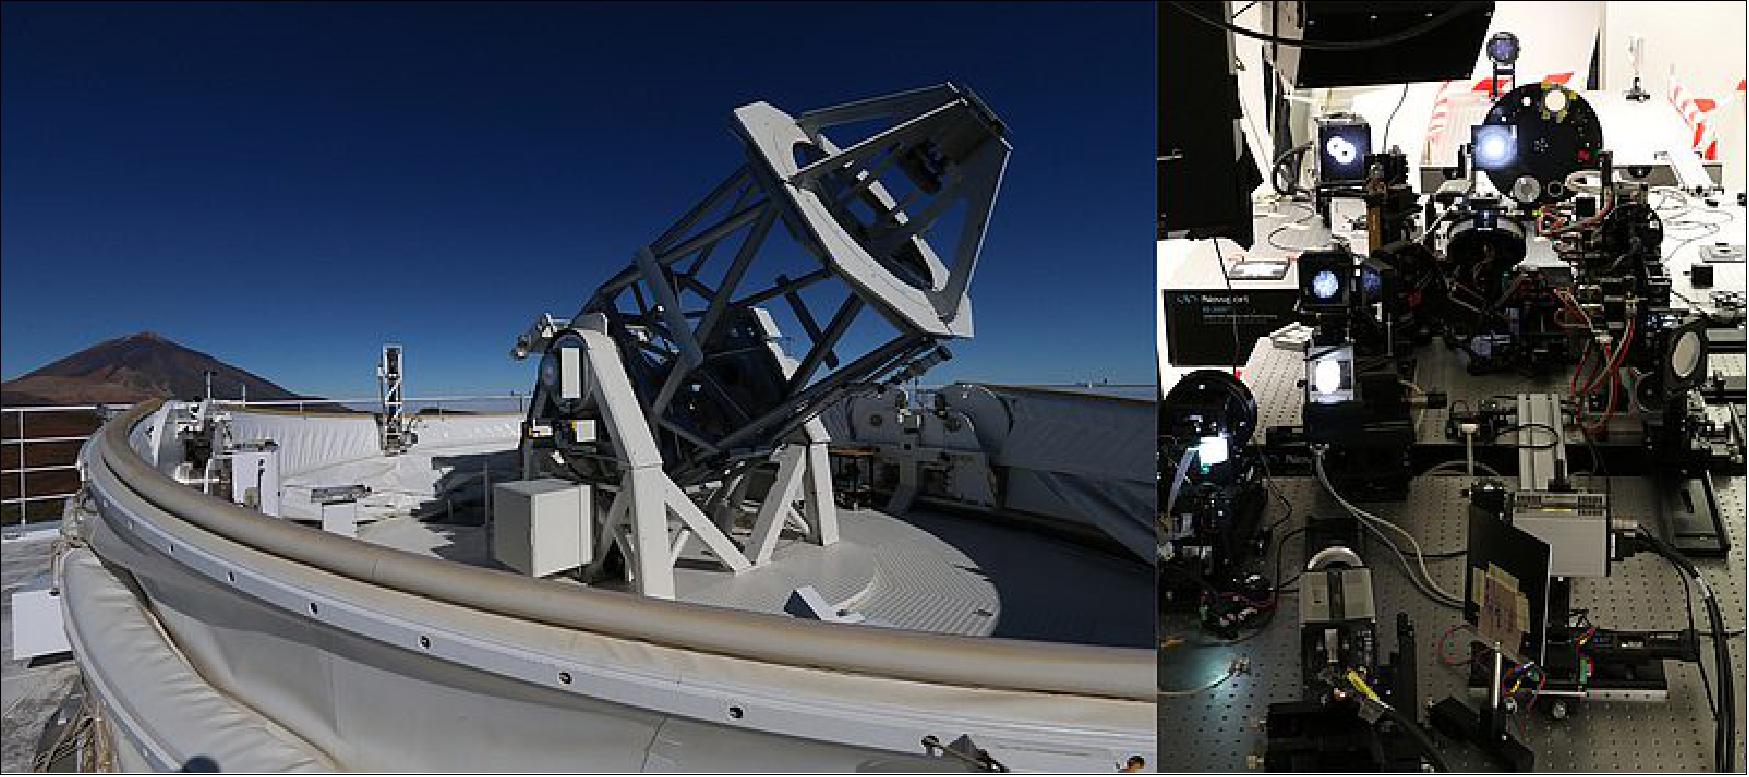 Figure 6: Left: The GREGOR telescope on Tenerife, Spain. Right: The newly redesigned optical laboratory of GREGOR (image credit: L. Kleint, KIS)